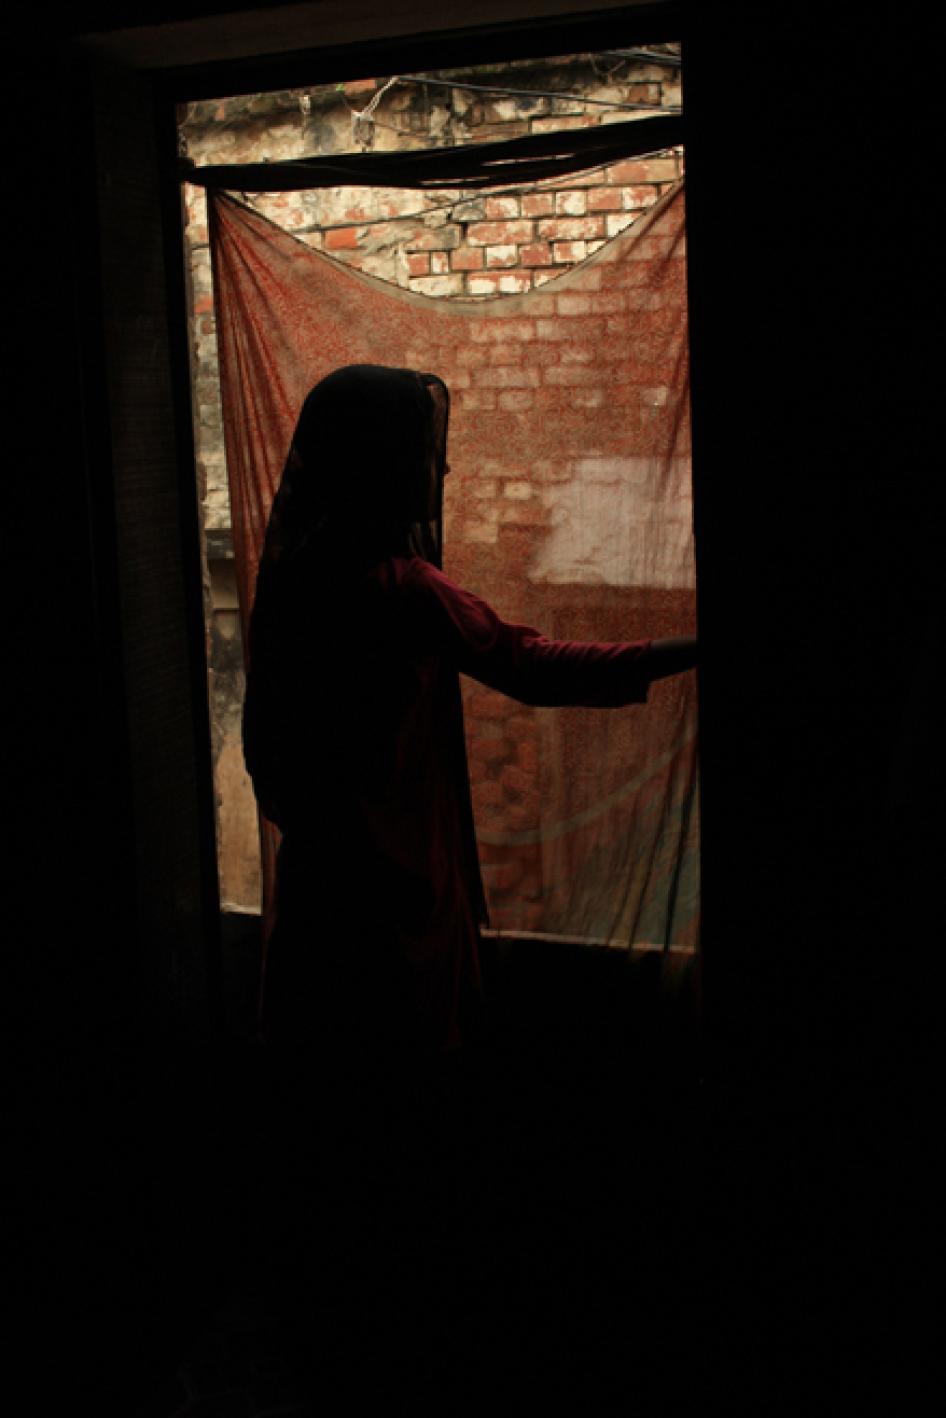 South Asia Failing to Address Its Child Rape Problem | Human Rights Watch